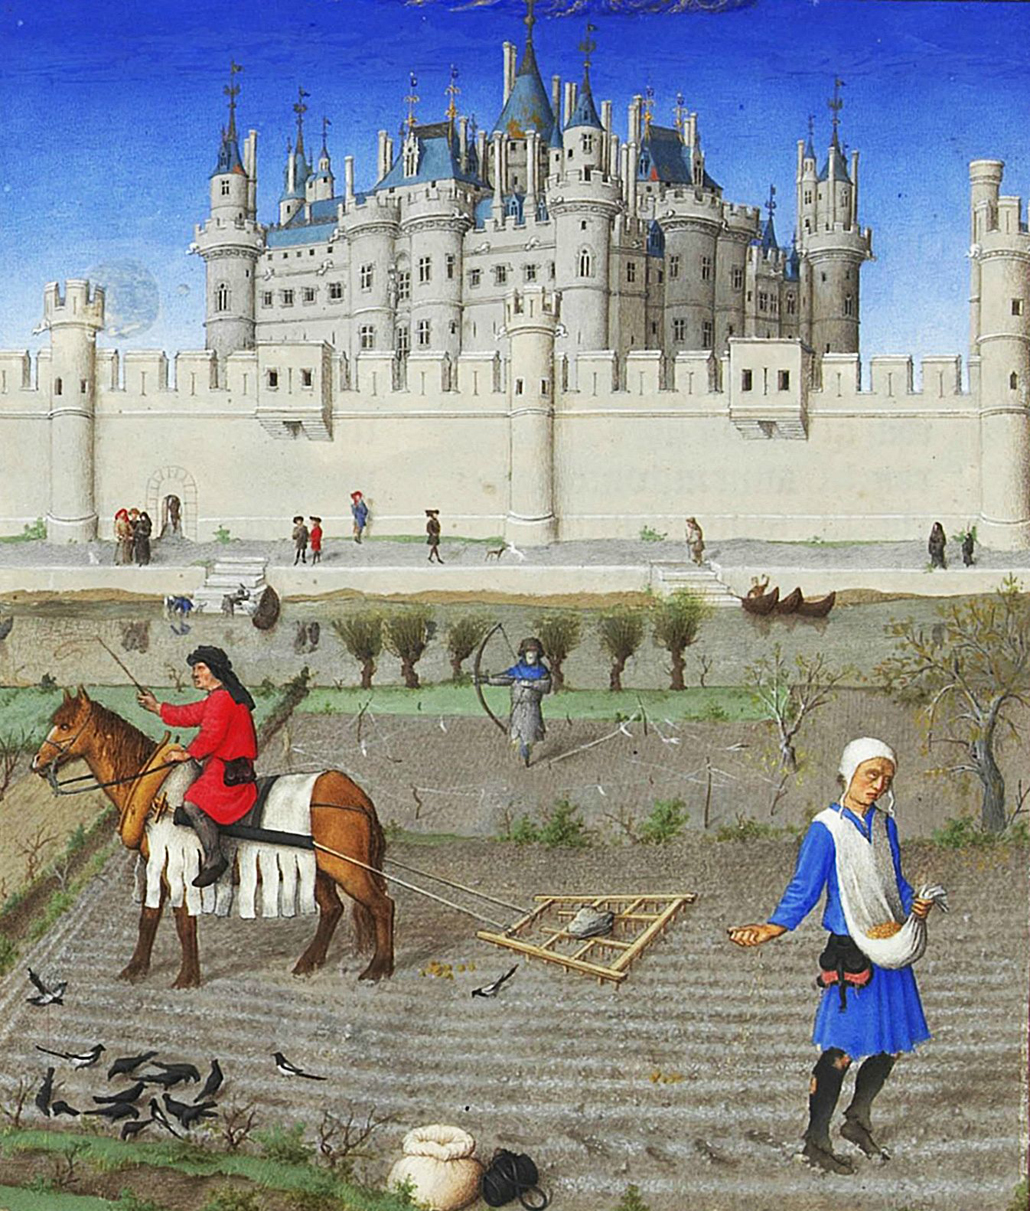 From Les Trés Riches Heures du Duc de Berry, published 1969 reproduced from the illuminated manuscript belonging to the Musée Condé Chantilly, France